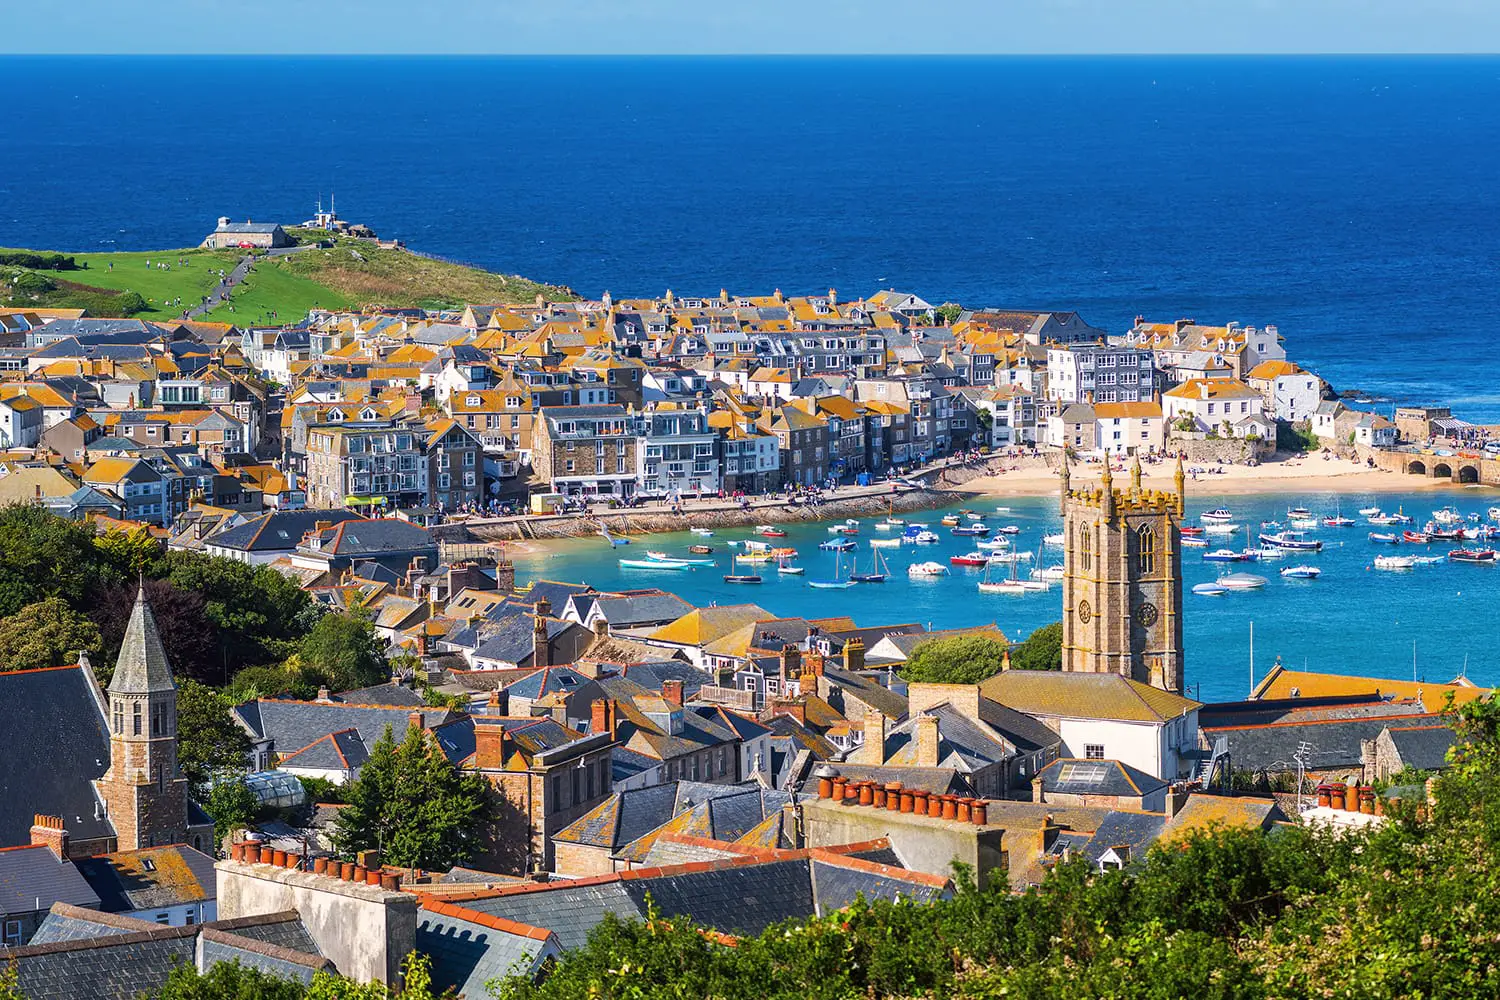 Picturesque St Ives, a popular seaside town and port in Cornwall, England, UK